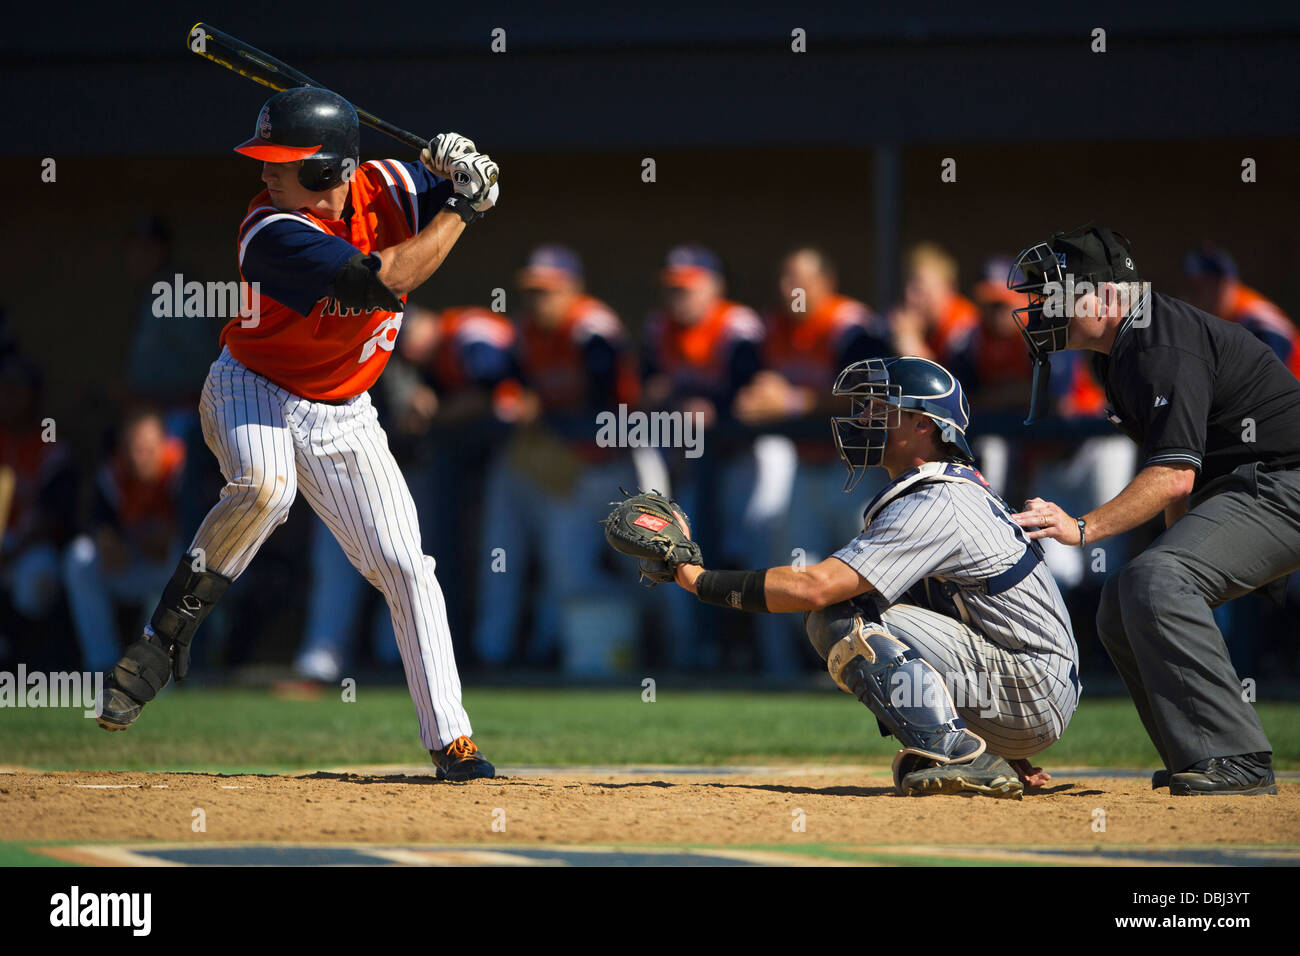 Up to bat at a college baseball game. Stock Photo